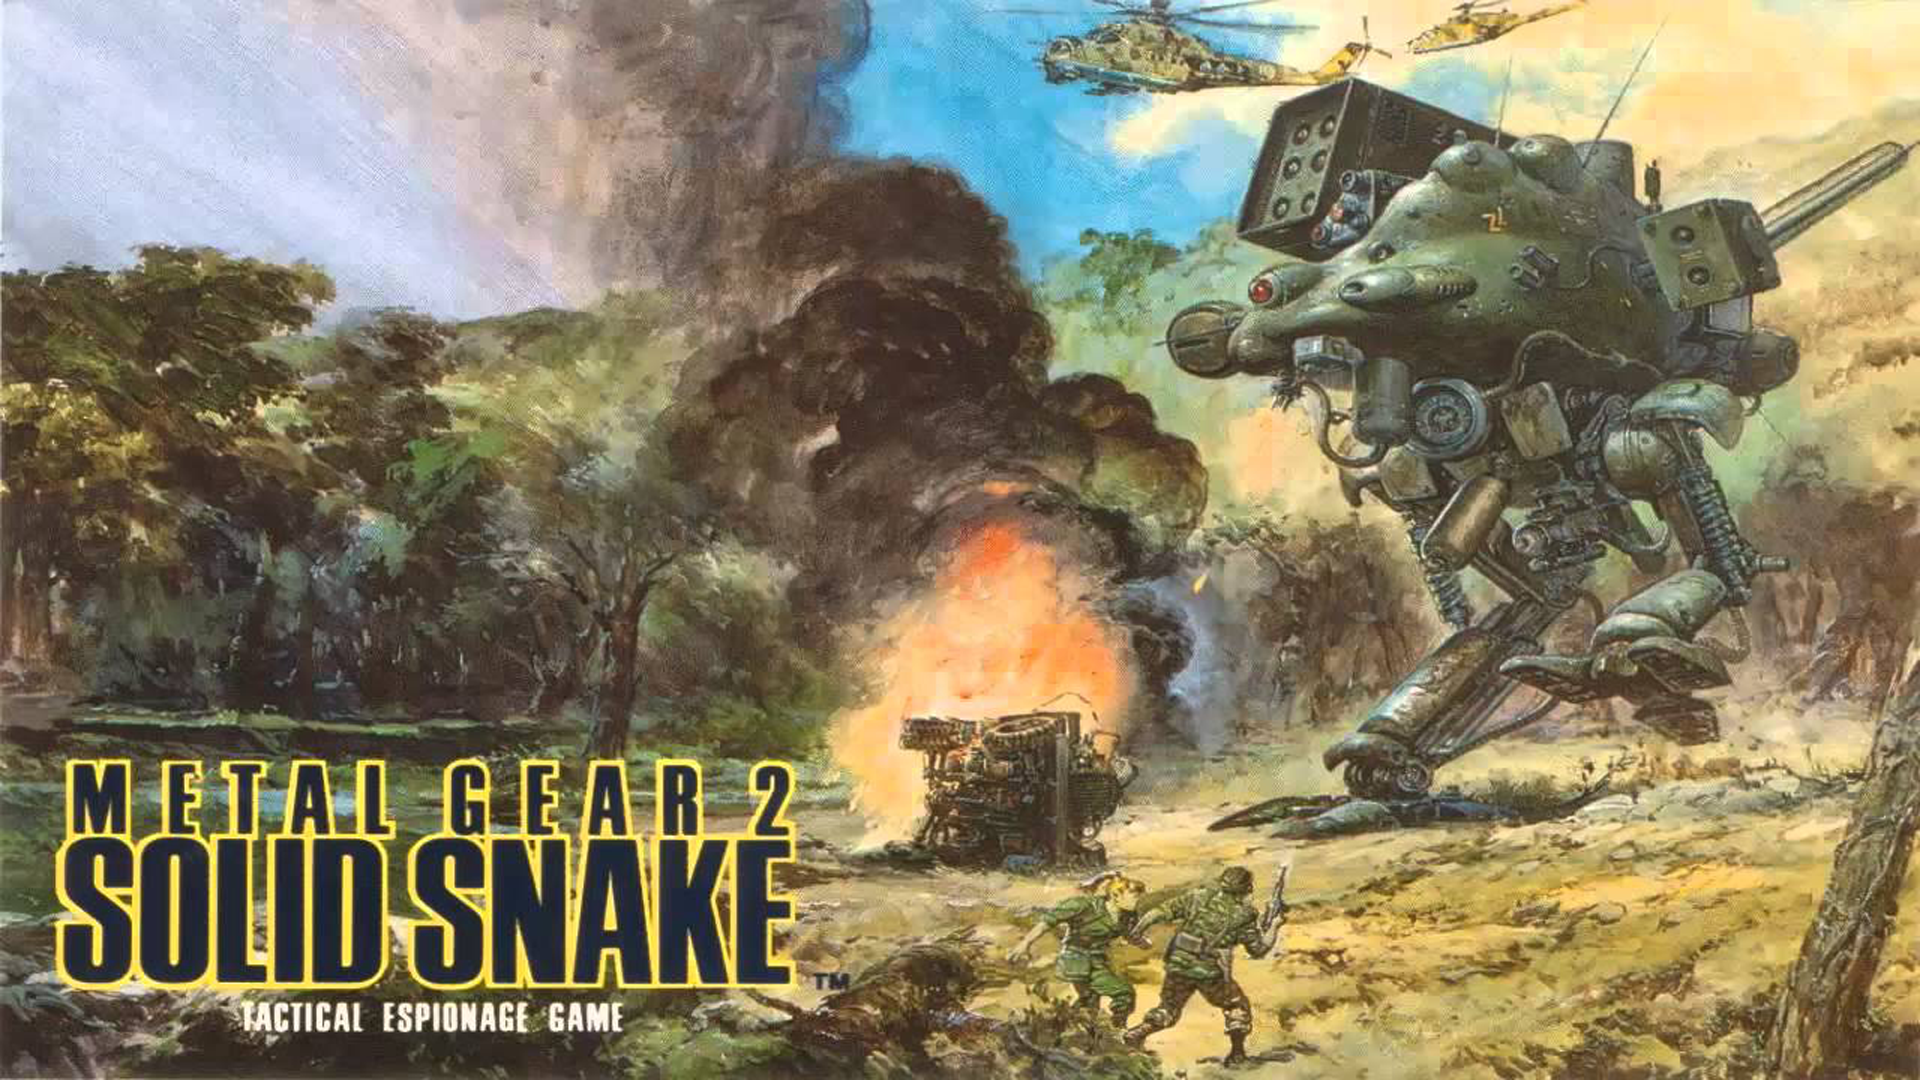 Let’s Play Metal Gear 2: Solid Snake